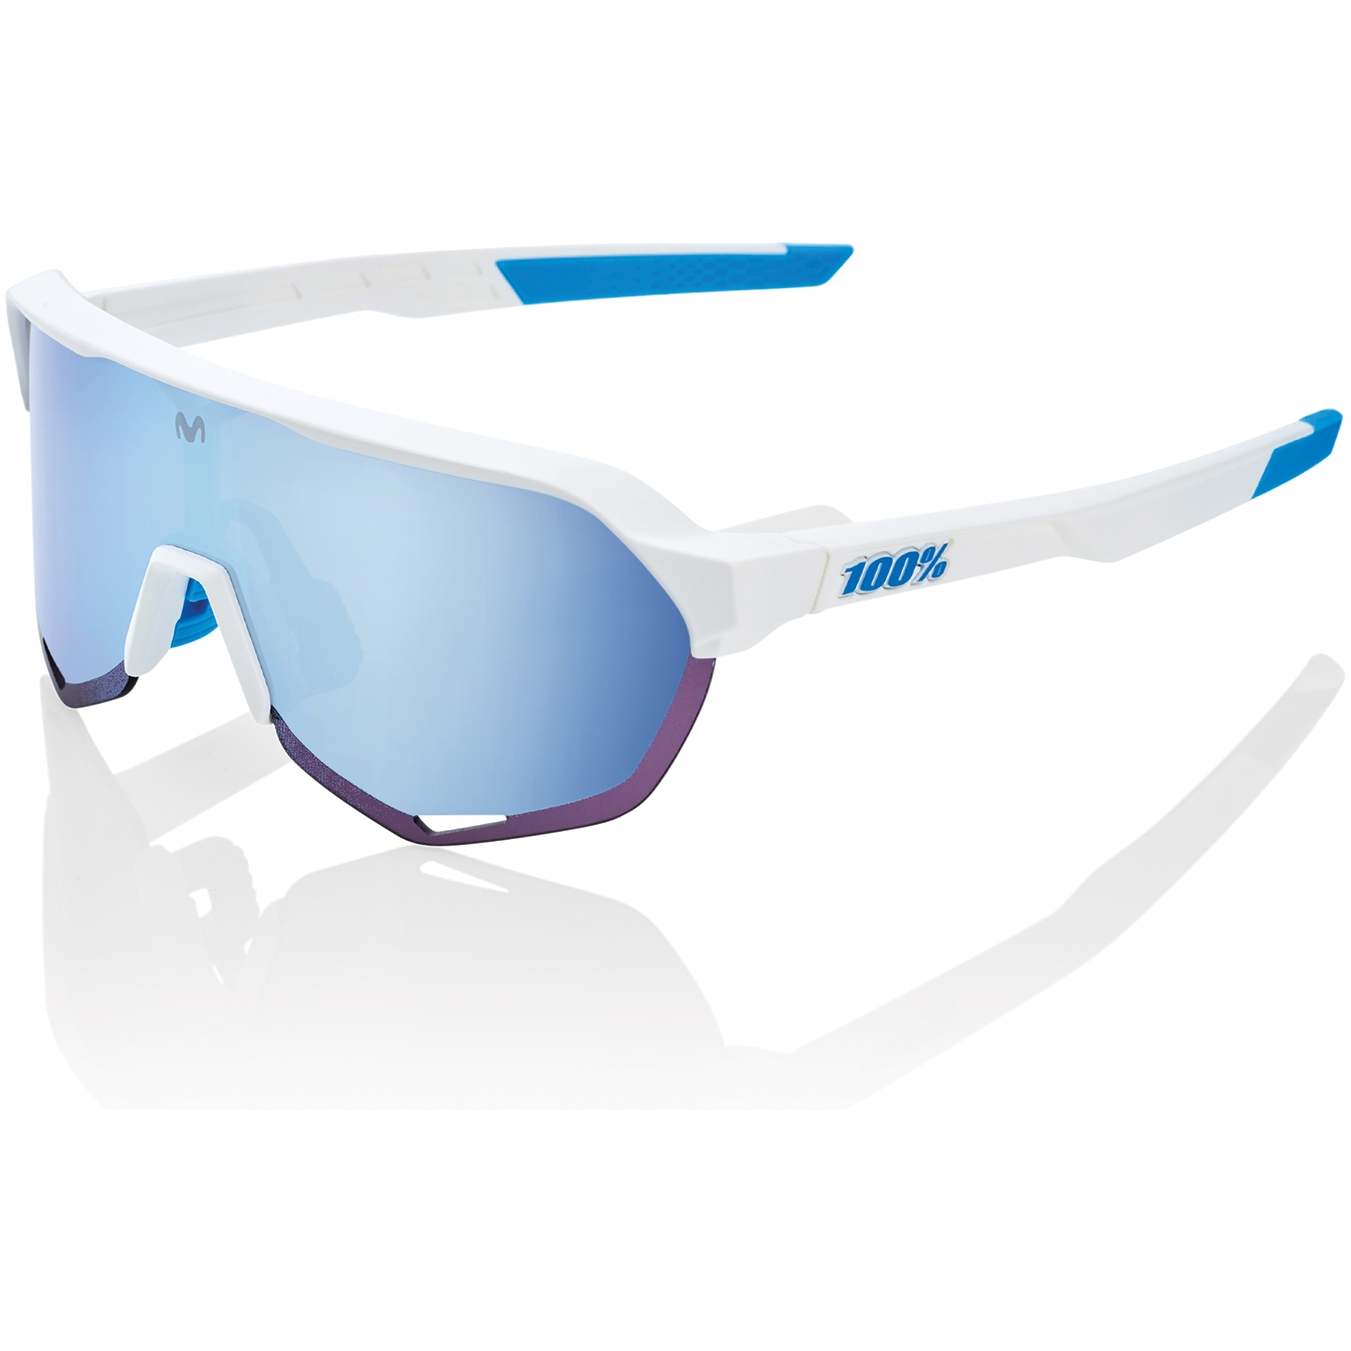 Productfoto van 100% S2 Movistar Glasses - HiPER Mirror Lens - Team White / Blue Multilayer + Clear